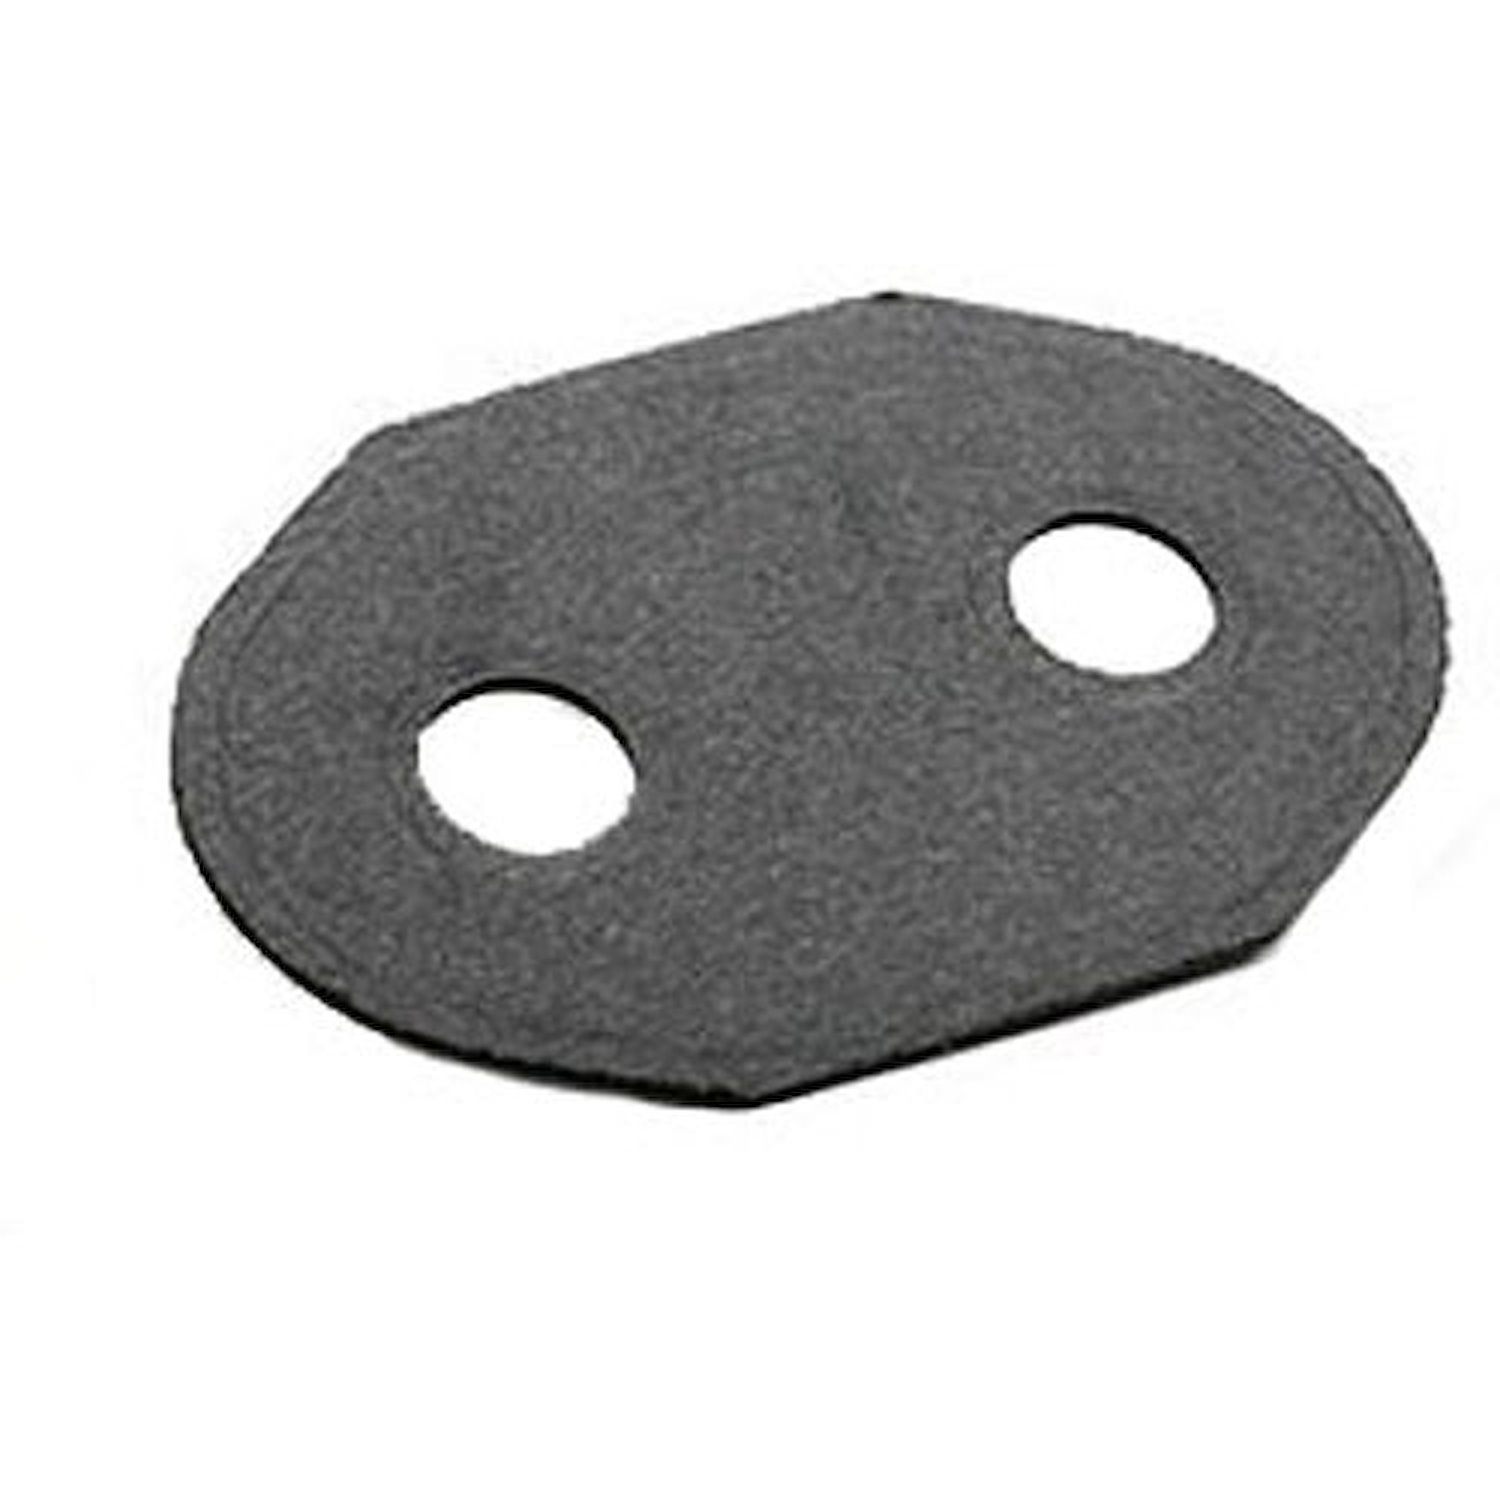 Replacement Gasket For 925-7155 Pop-Off Plate Rear of